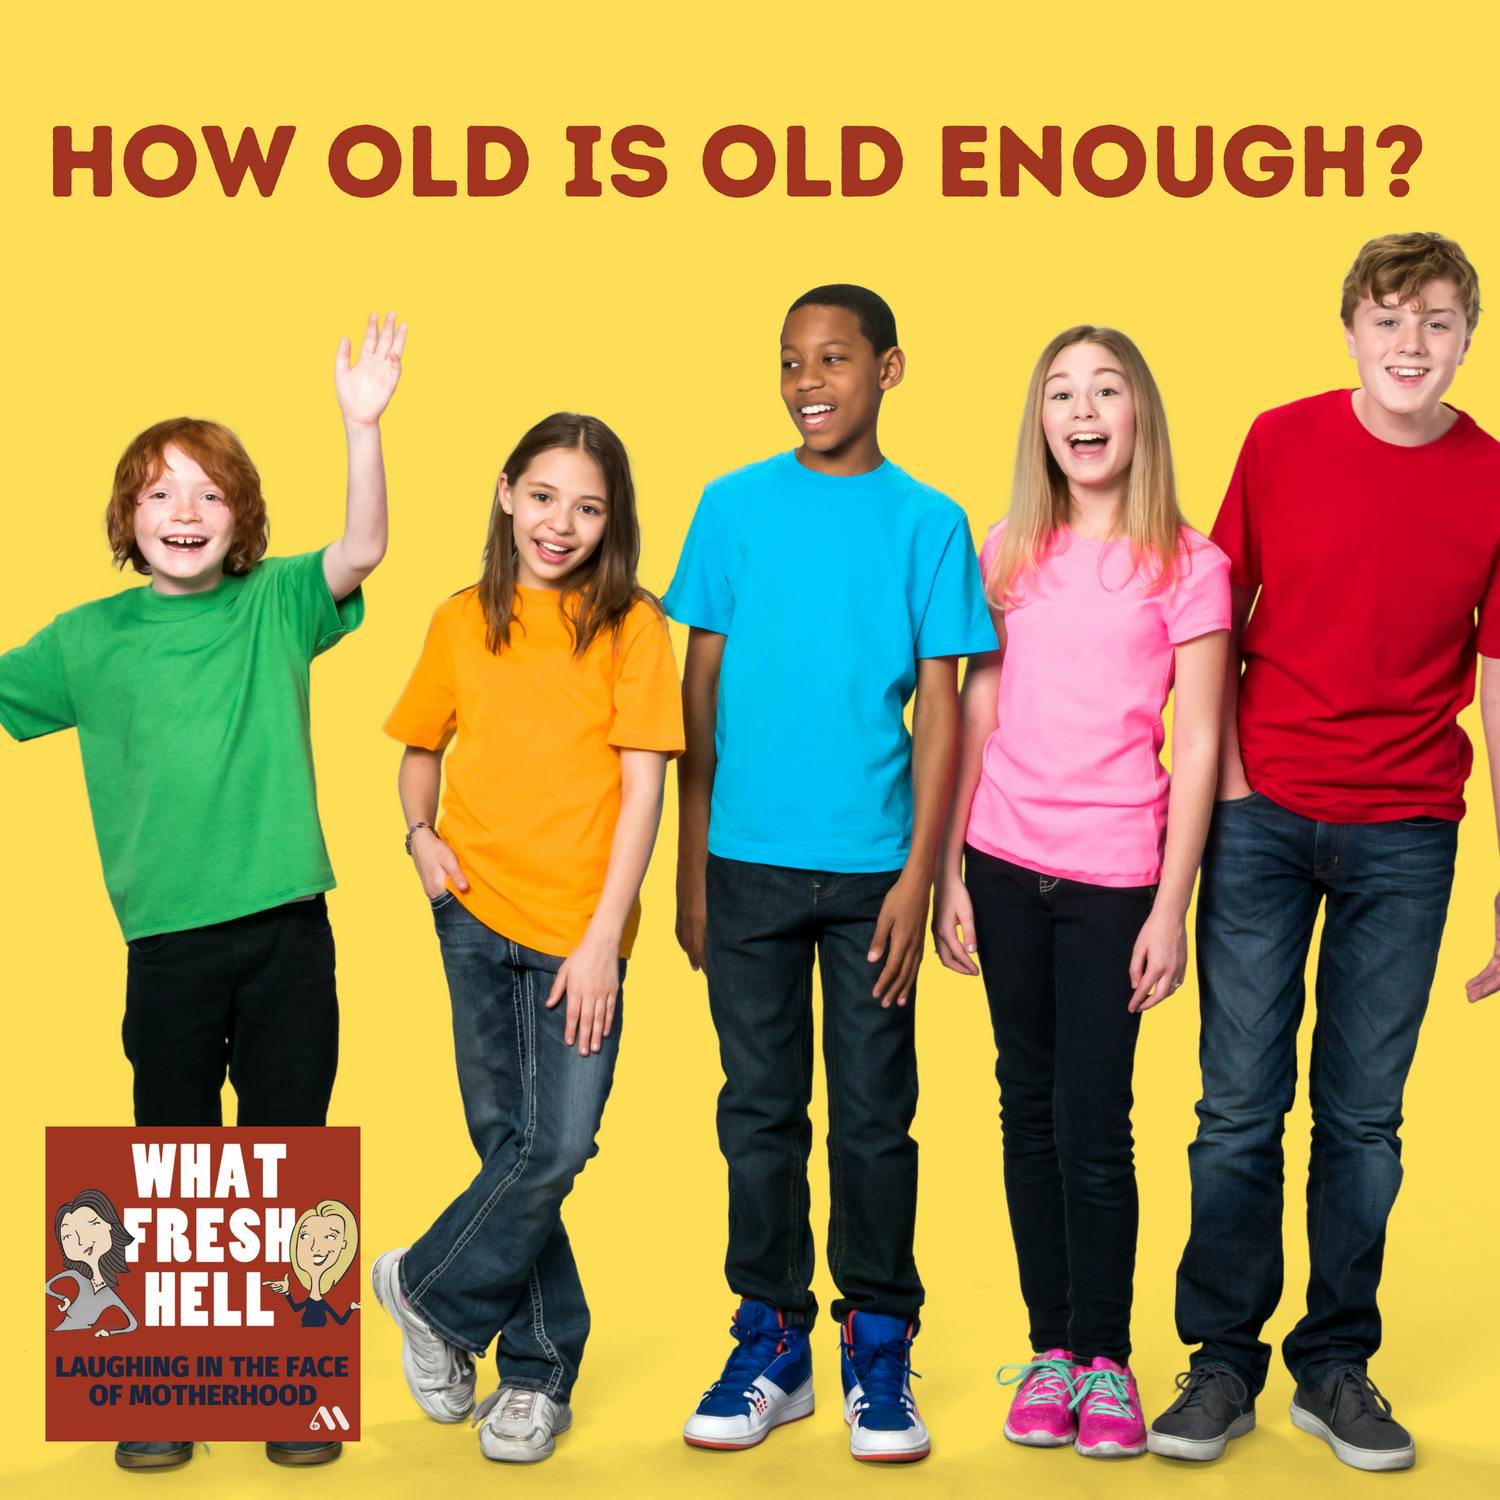 How Old Is Old Enough?